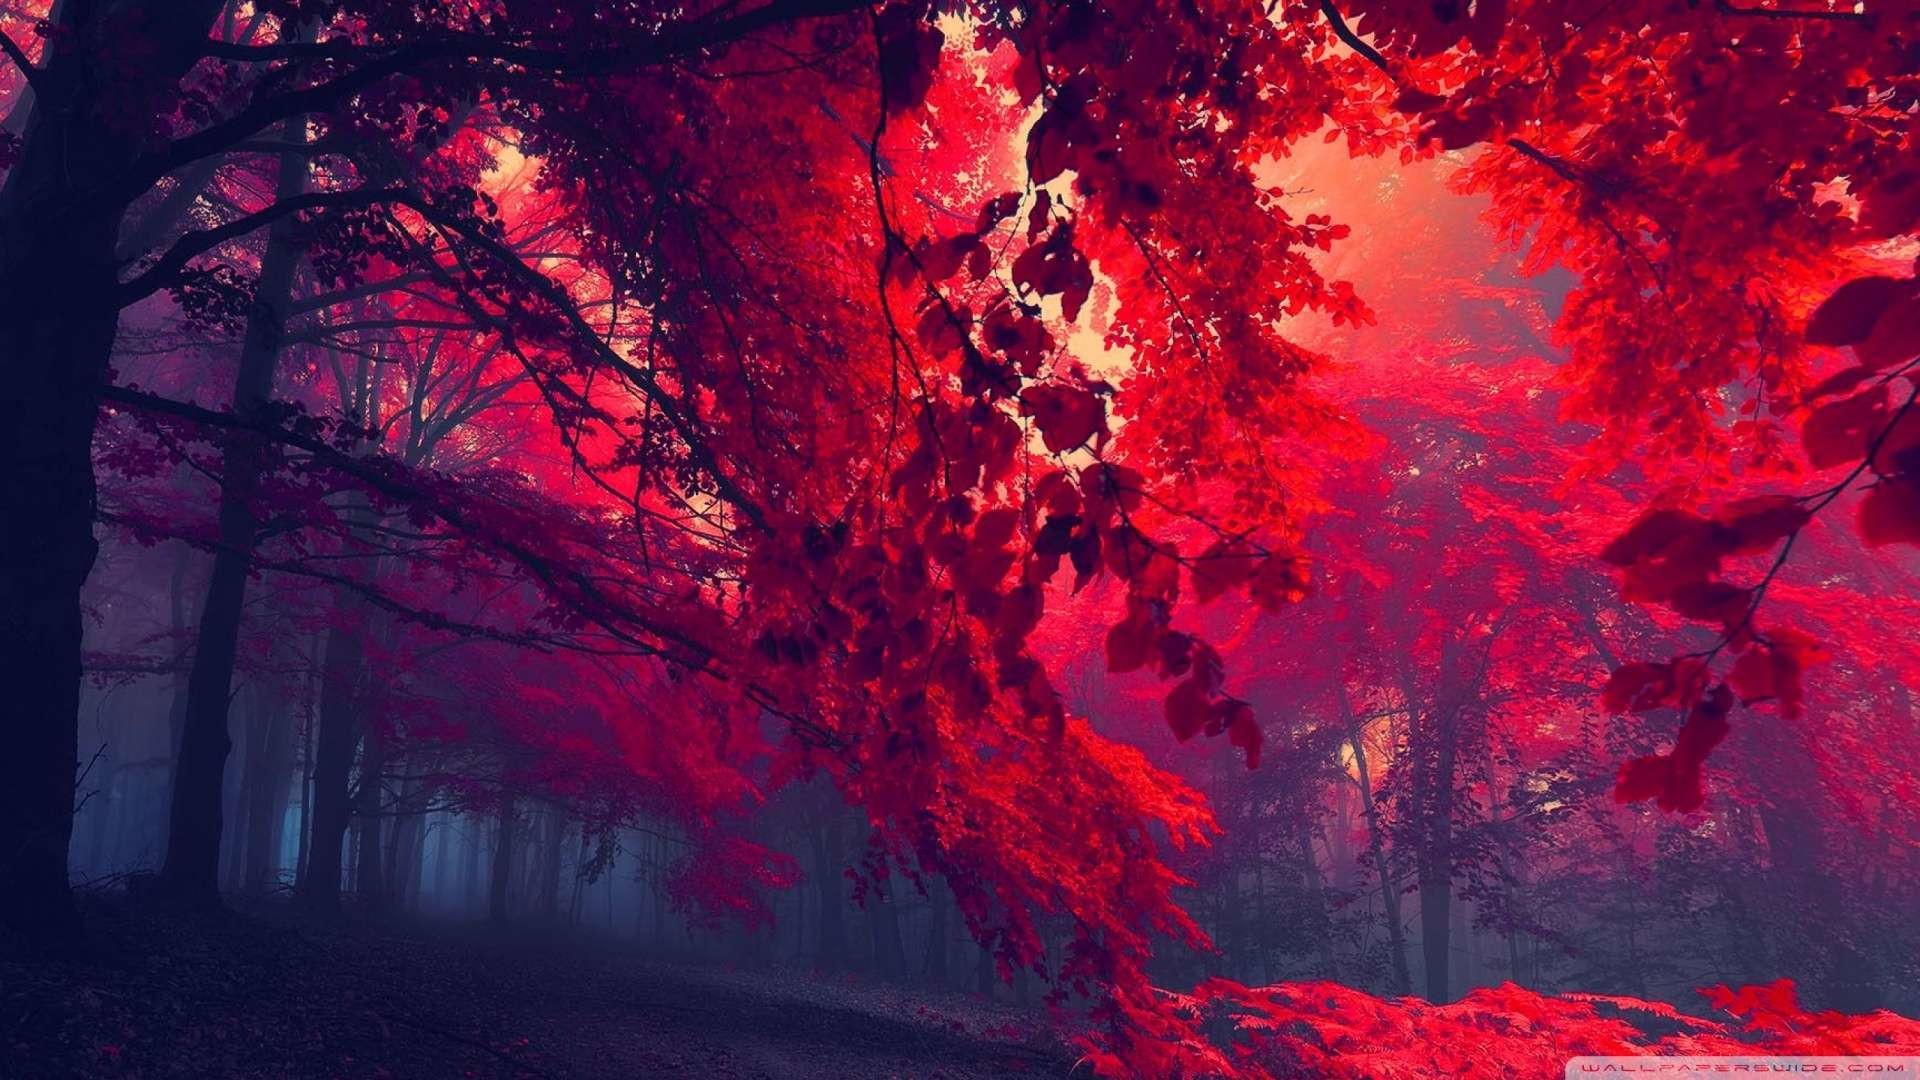 1920x1080 Wallpaper: Red Forest 4 Wallpaper 1080p HD. Upload at February 25 .